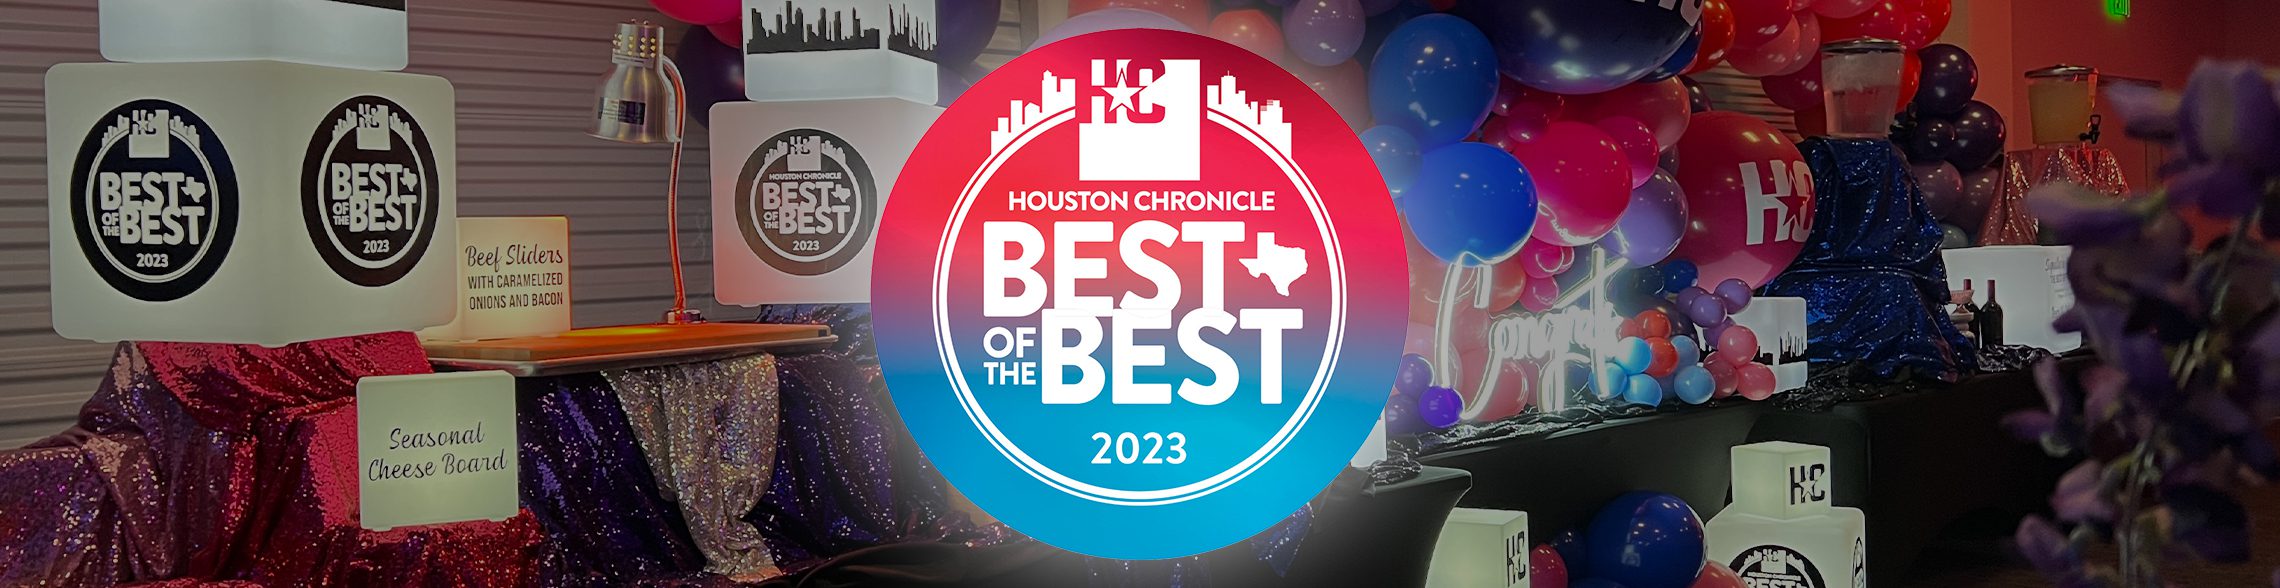 Houston Chronicle Best of The Best Awards » Houston Party Planners